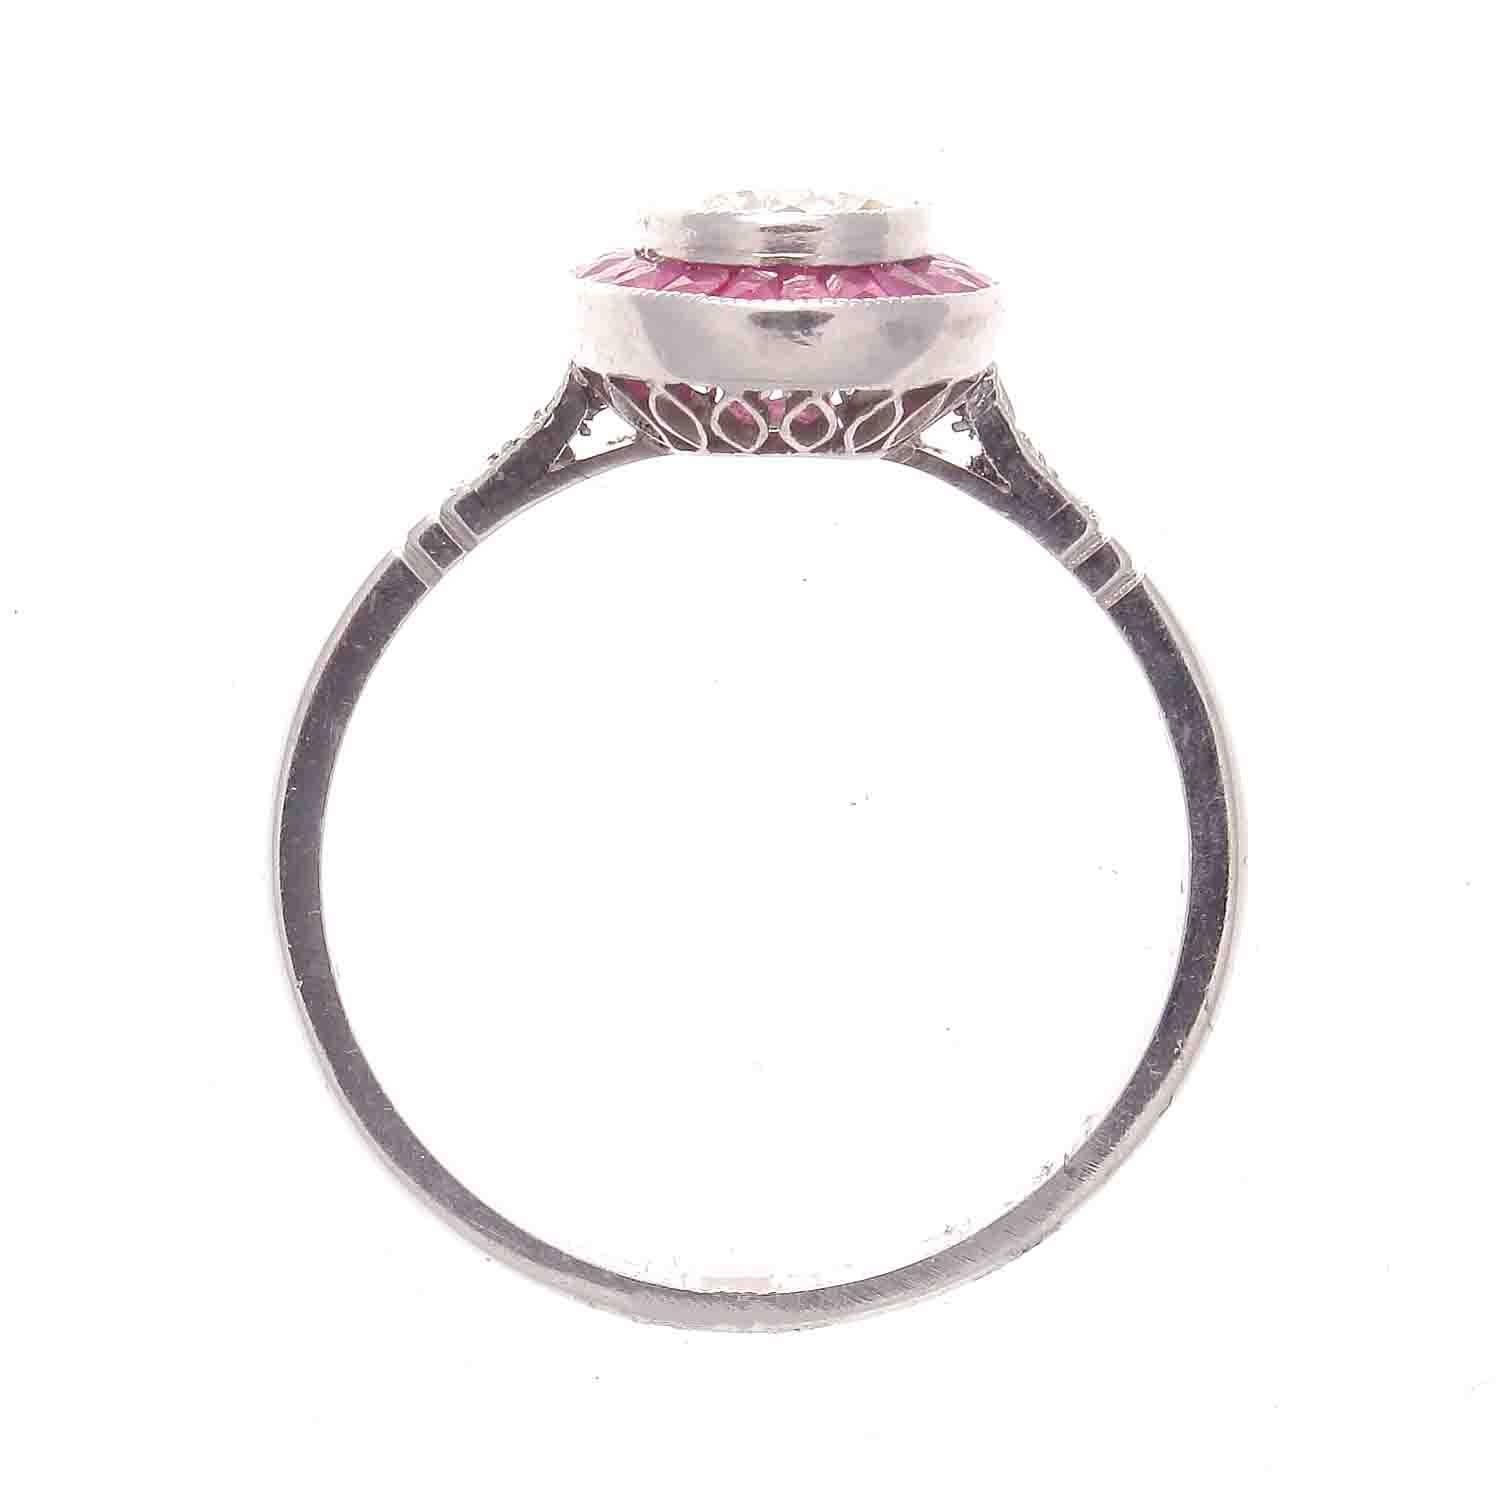 A stylish recreation from the art deco era. Featuring a lively 0.65 brilliant diamond surrounded by a halo of vibrant rubies. A colorful and well made ring, lovingly hand crafted in platinum.
Ring size 6 3/4 and may easily be re-sized to fit.